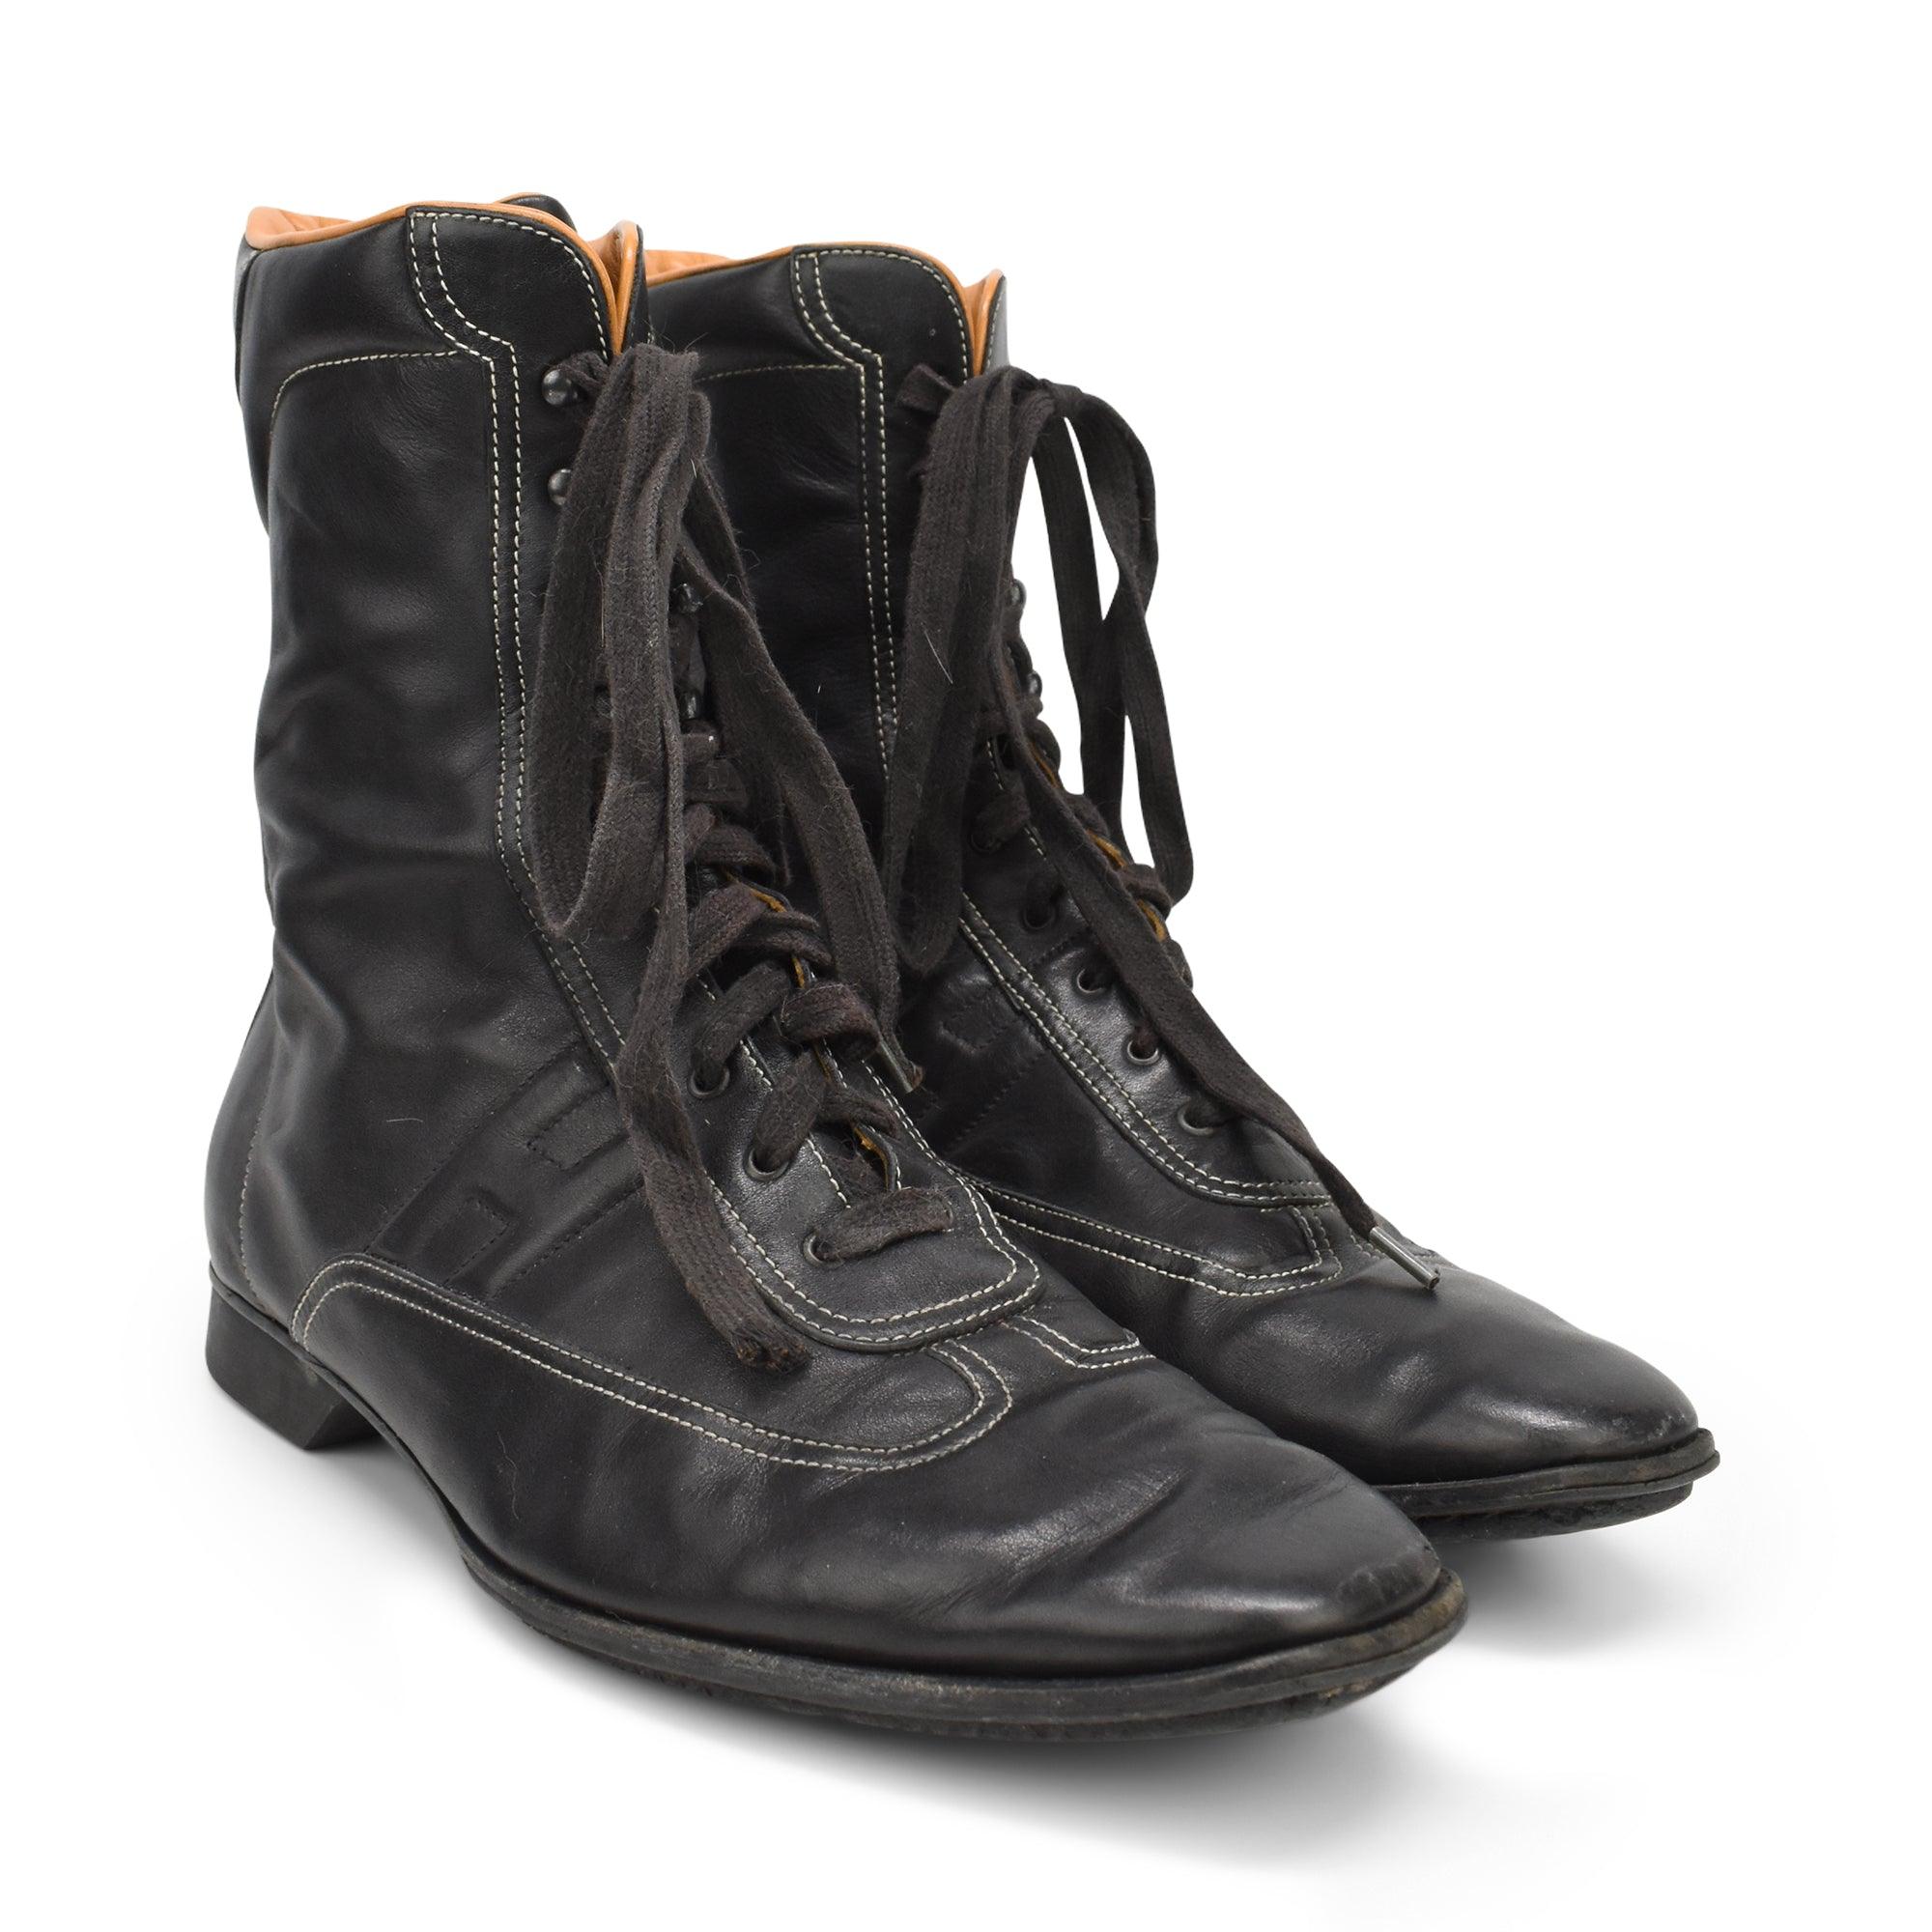 Hermes Boots - Women’s 41.5 - Fashionably Yours